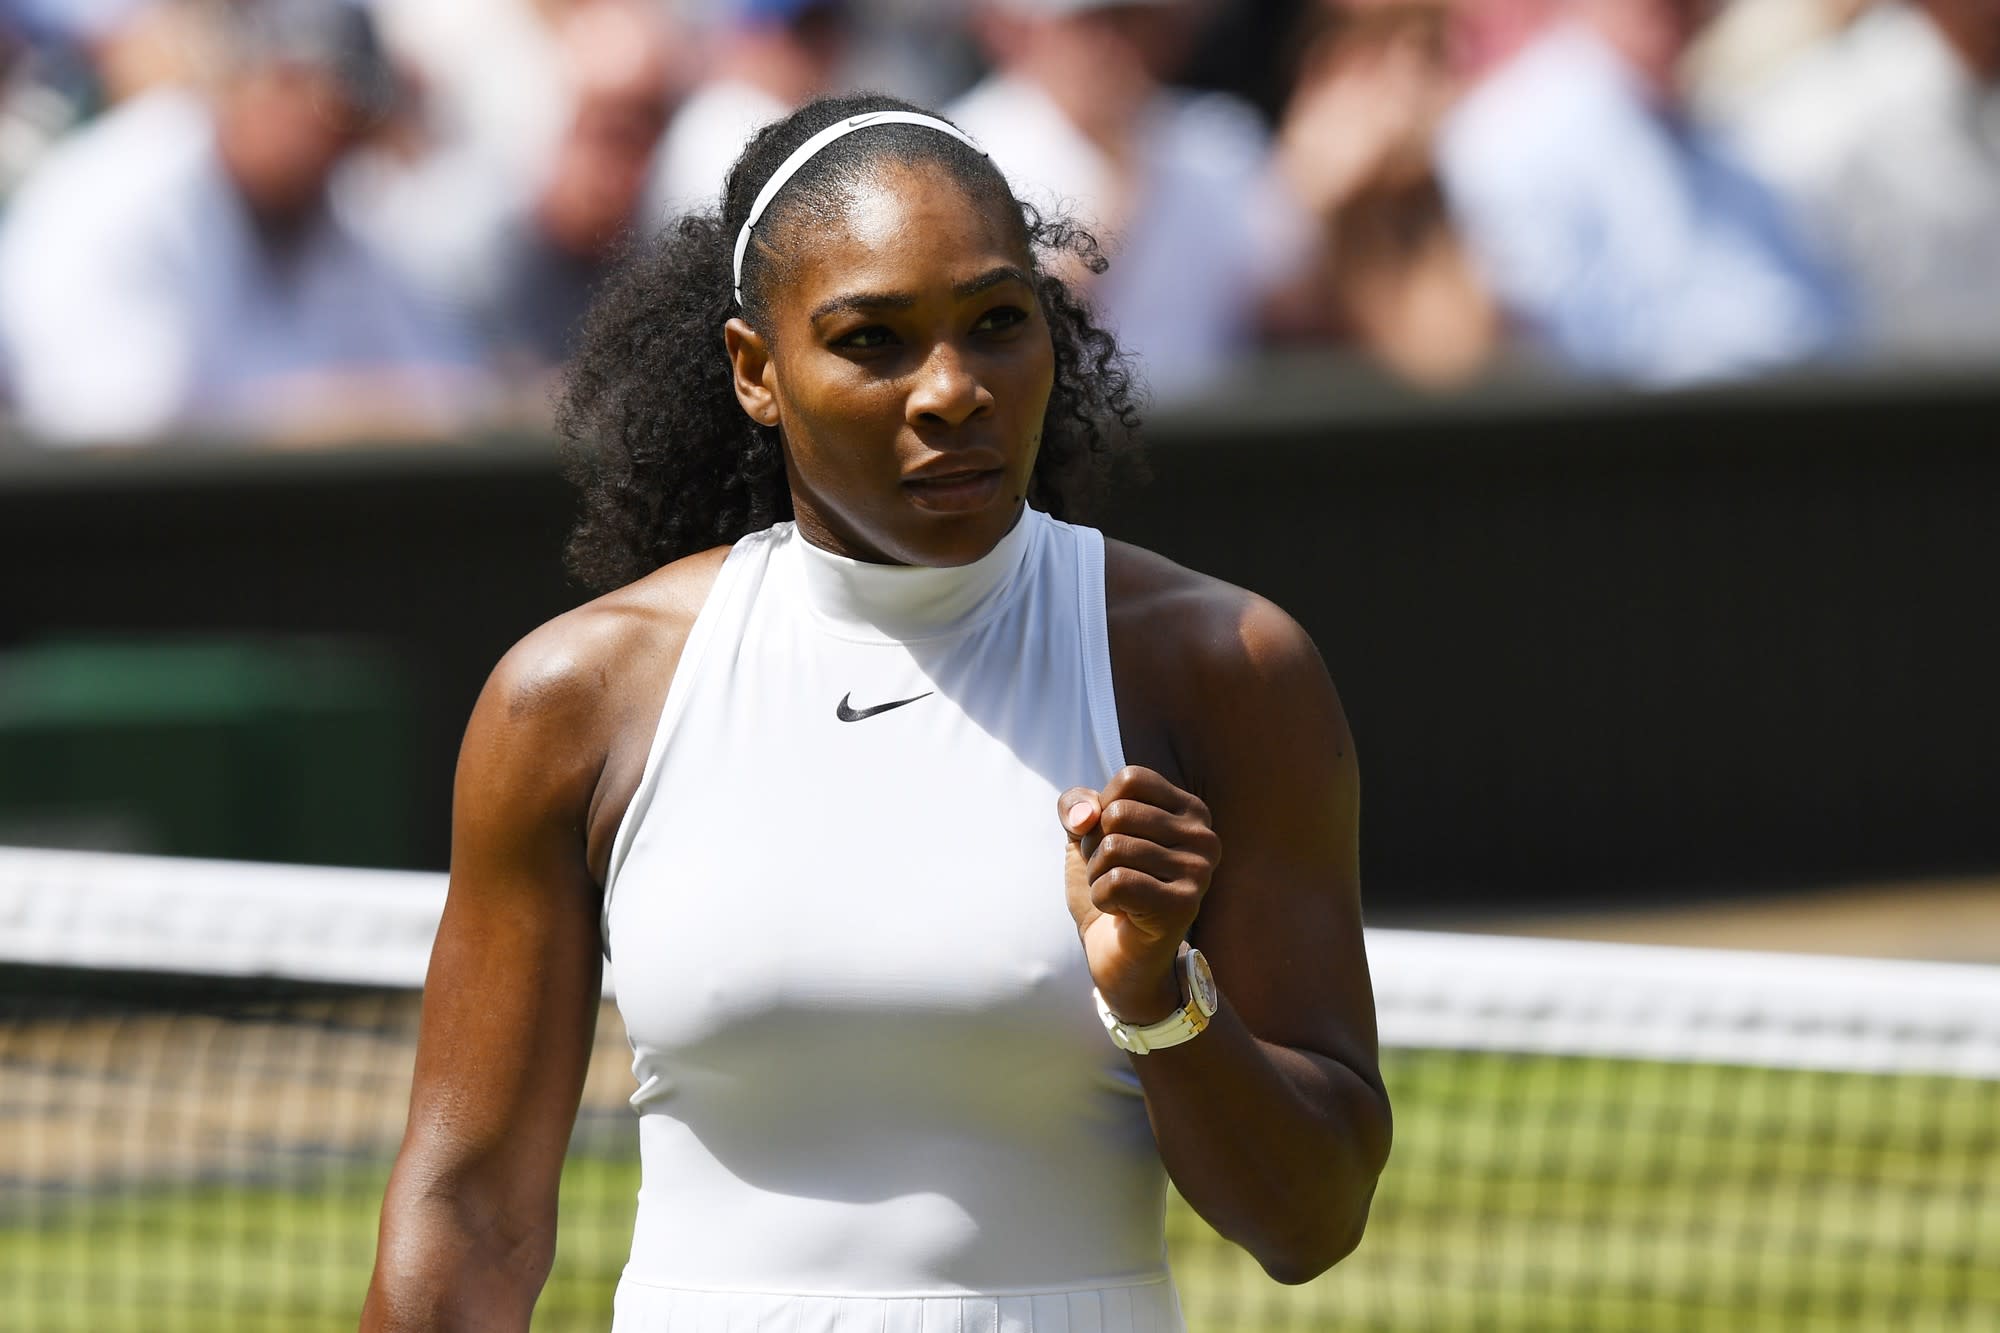 People Are Complaining About Seeing Serena Williams' Nipples As She Do...